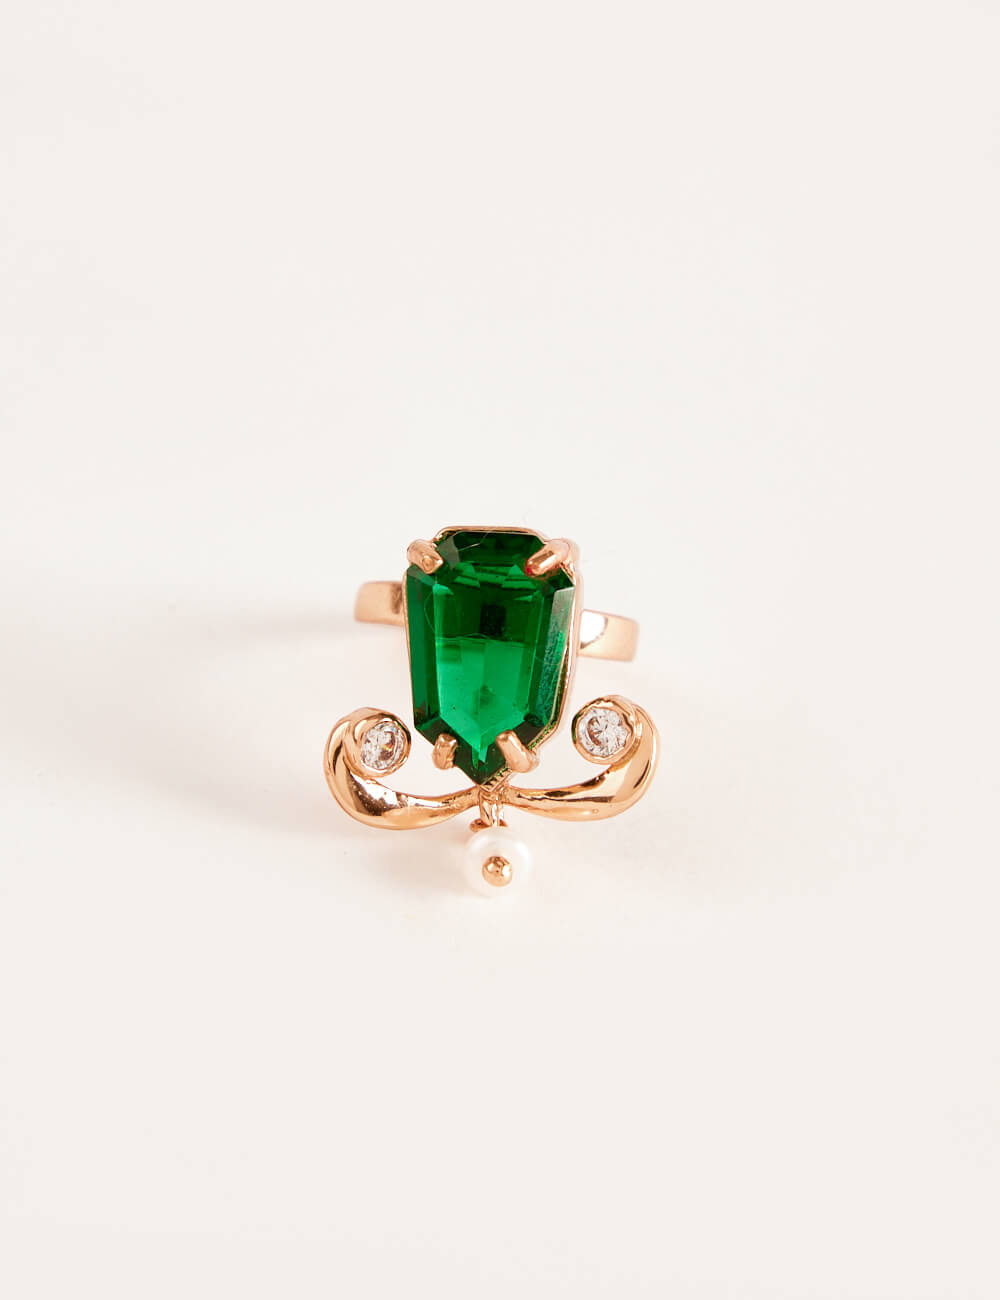 Vintage Signed Extremely RARE Yves Saint Laurent Ring W/Green Color Oval  Stone | eBay